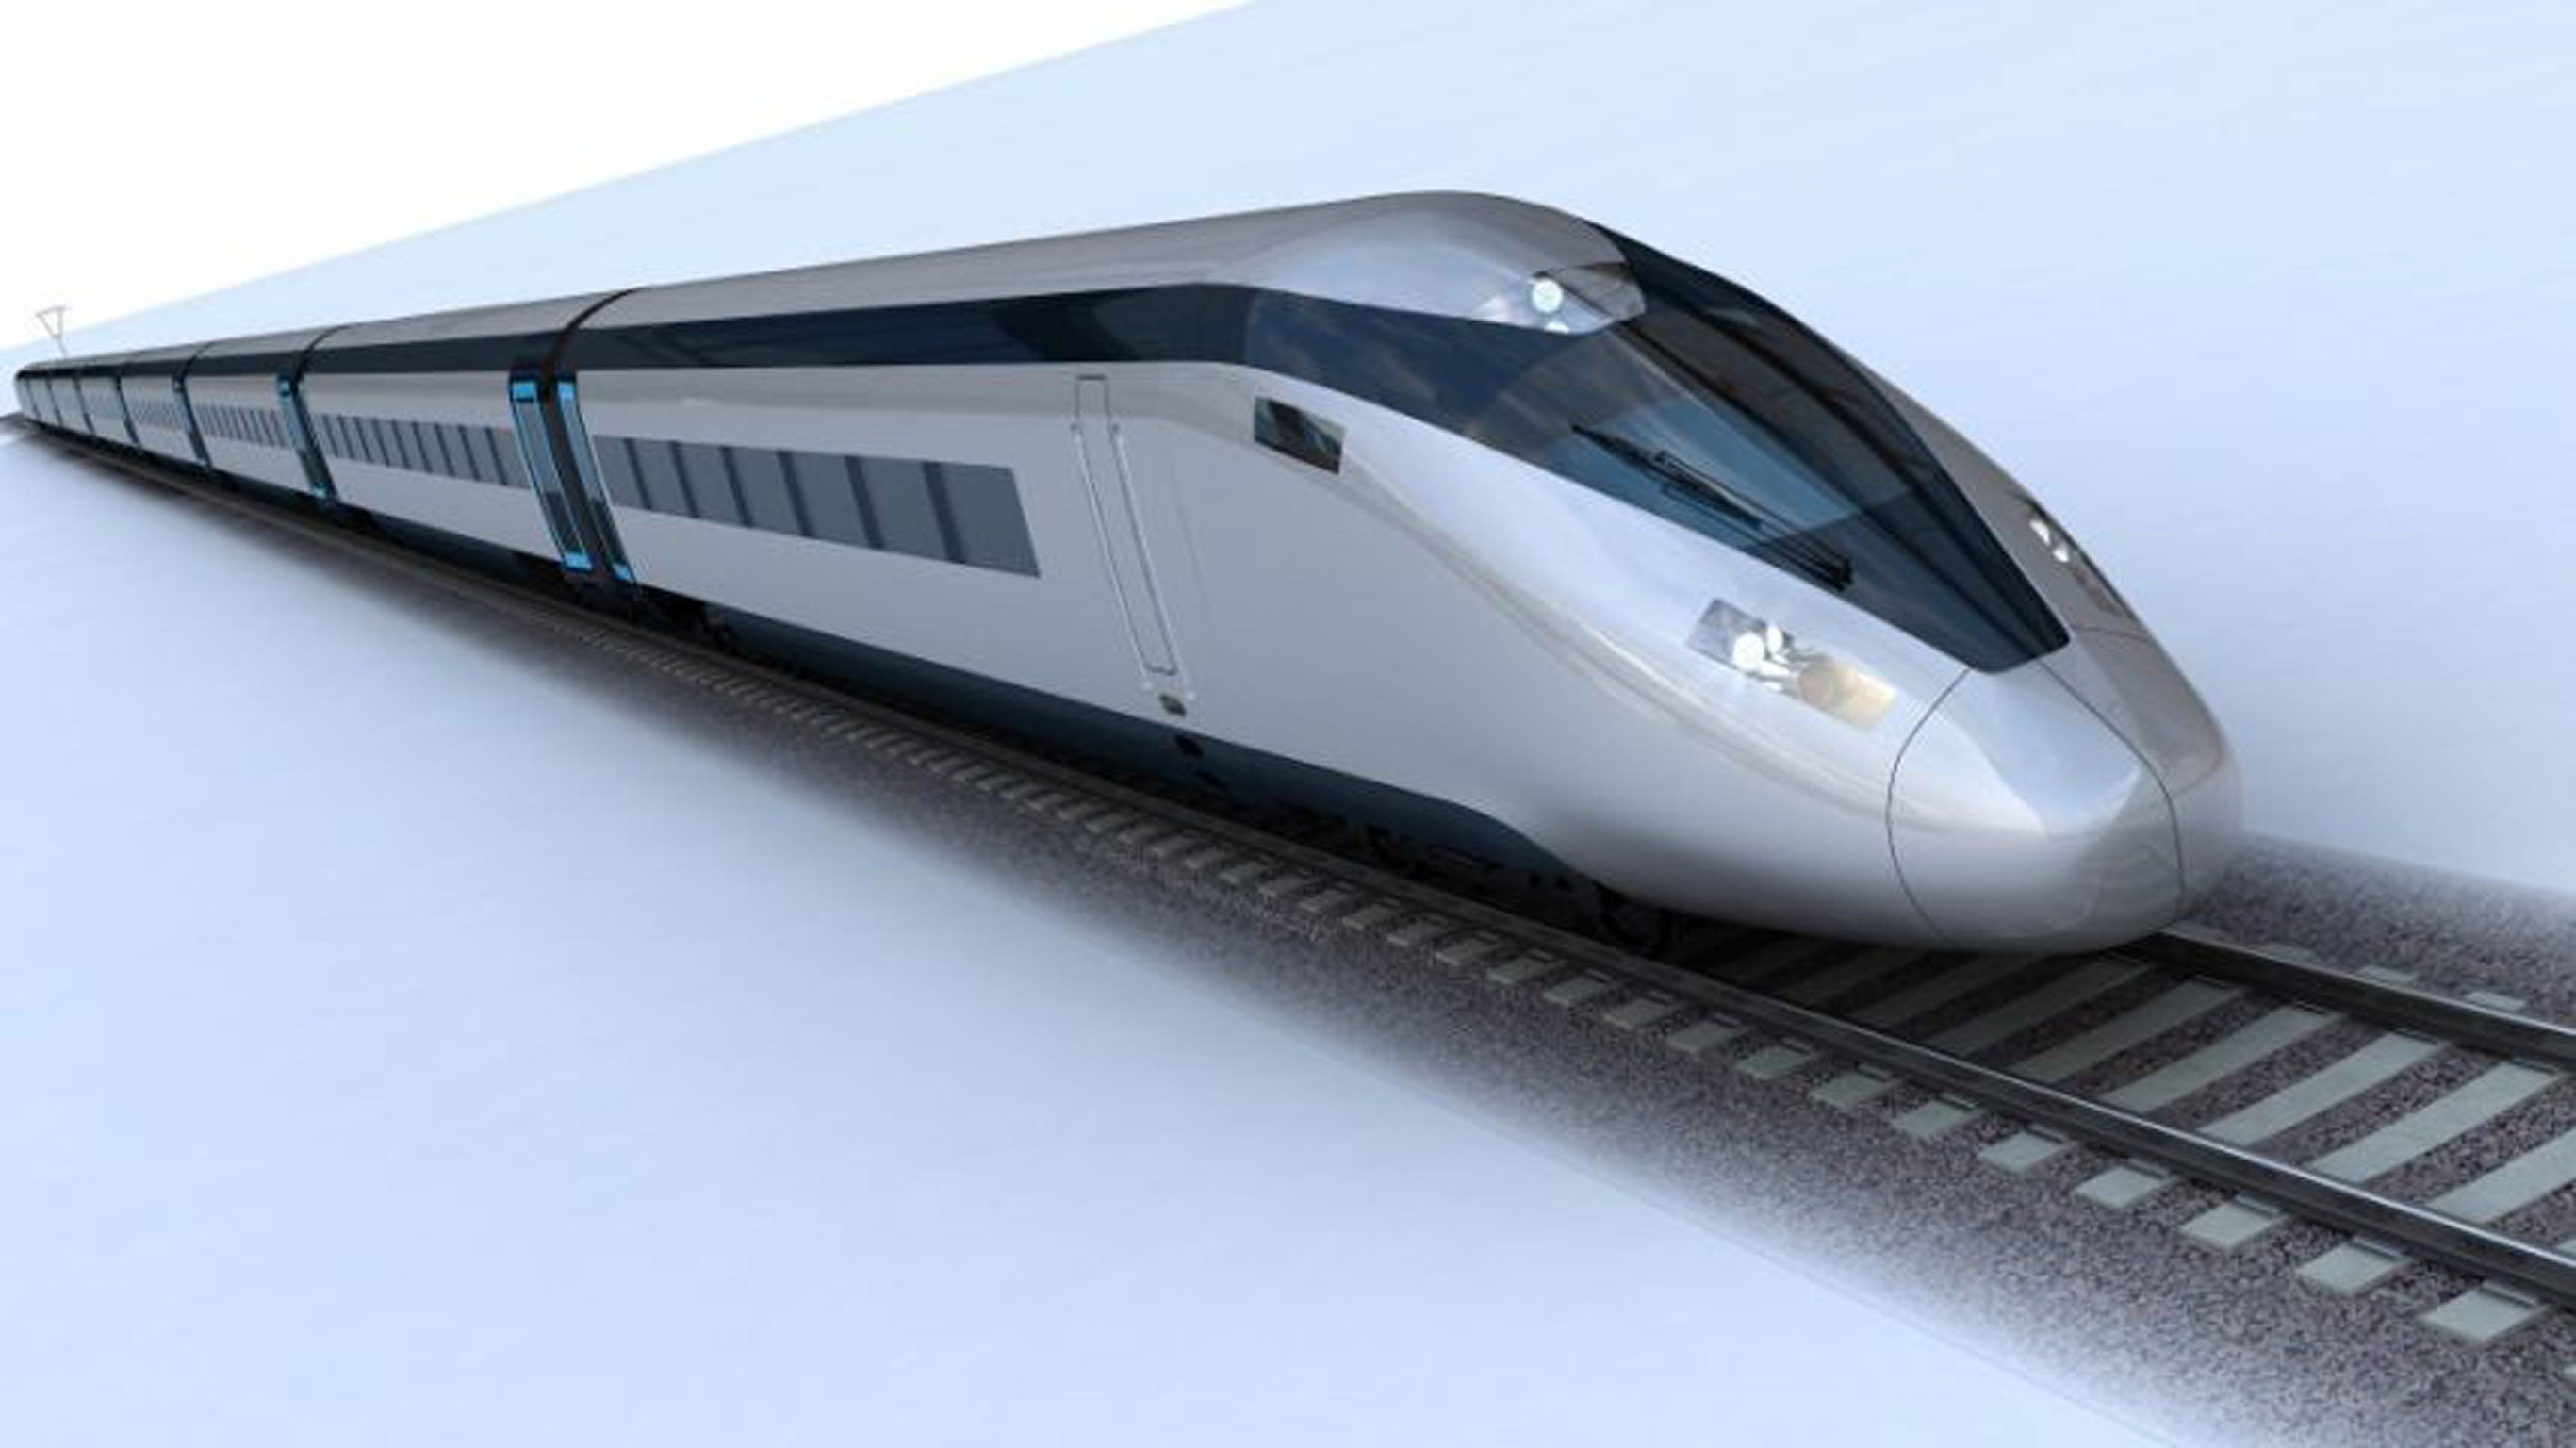 Photo issued by HS2 of the potential high speed train design, as the Government is publishing a Hybrid Bill to get the first phase of the £50 billion HS2 high-speed rail project up and running